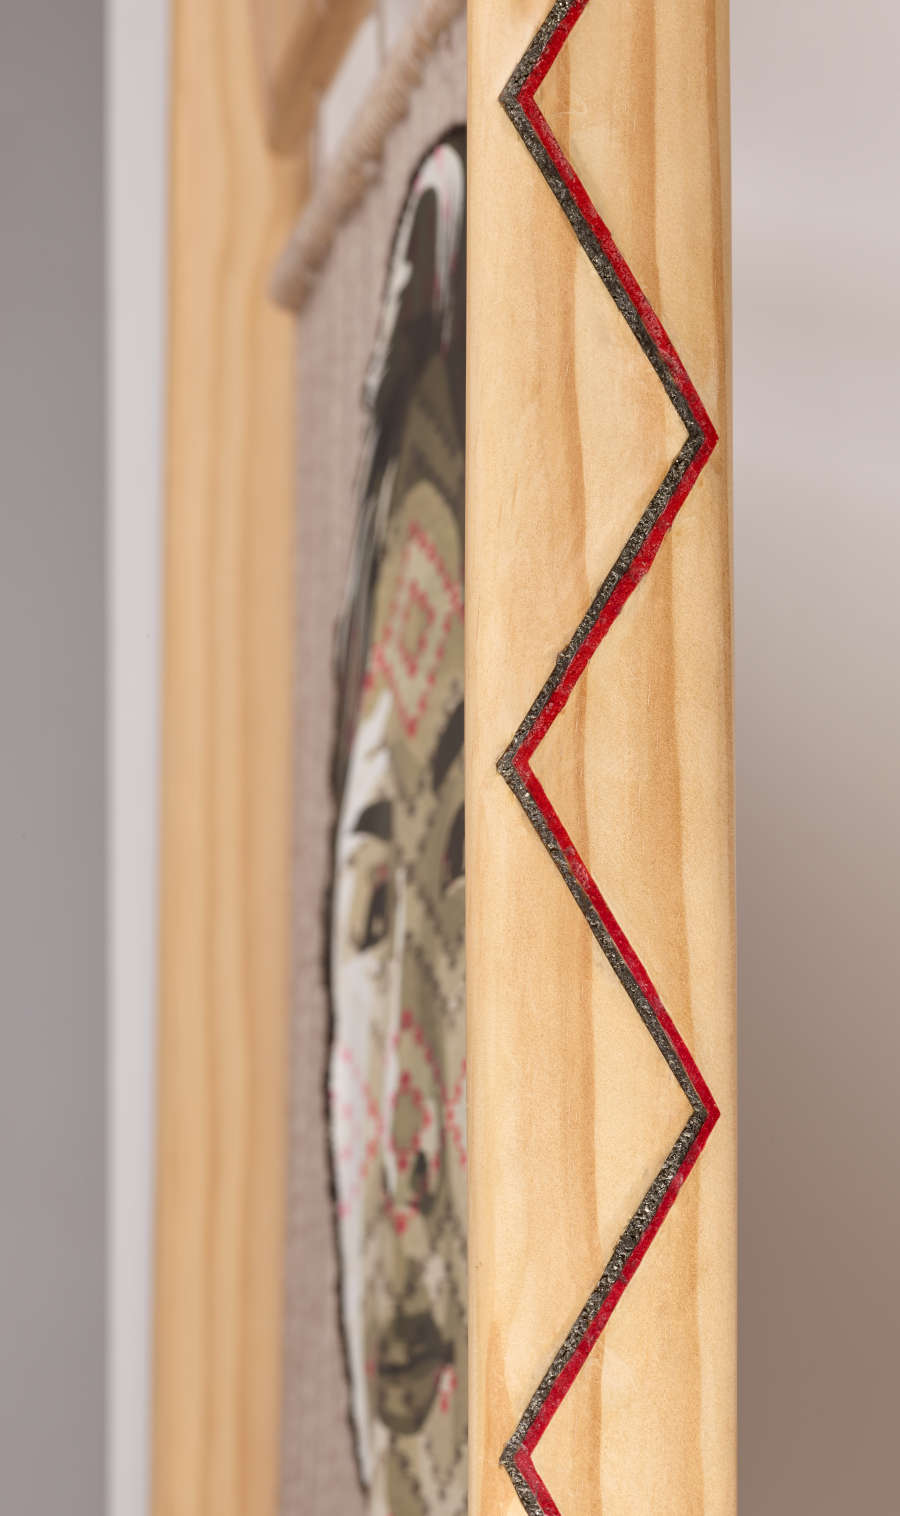 Close-up of a wooden frame's corner,  which is detailed with a vertical red and black zigzag design. The wooden frame holds a natural-toned woven tapestry of a figure’s face.  